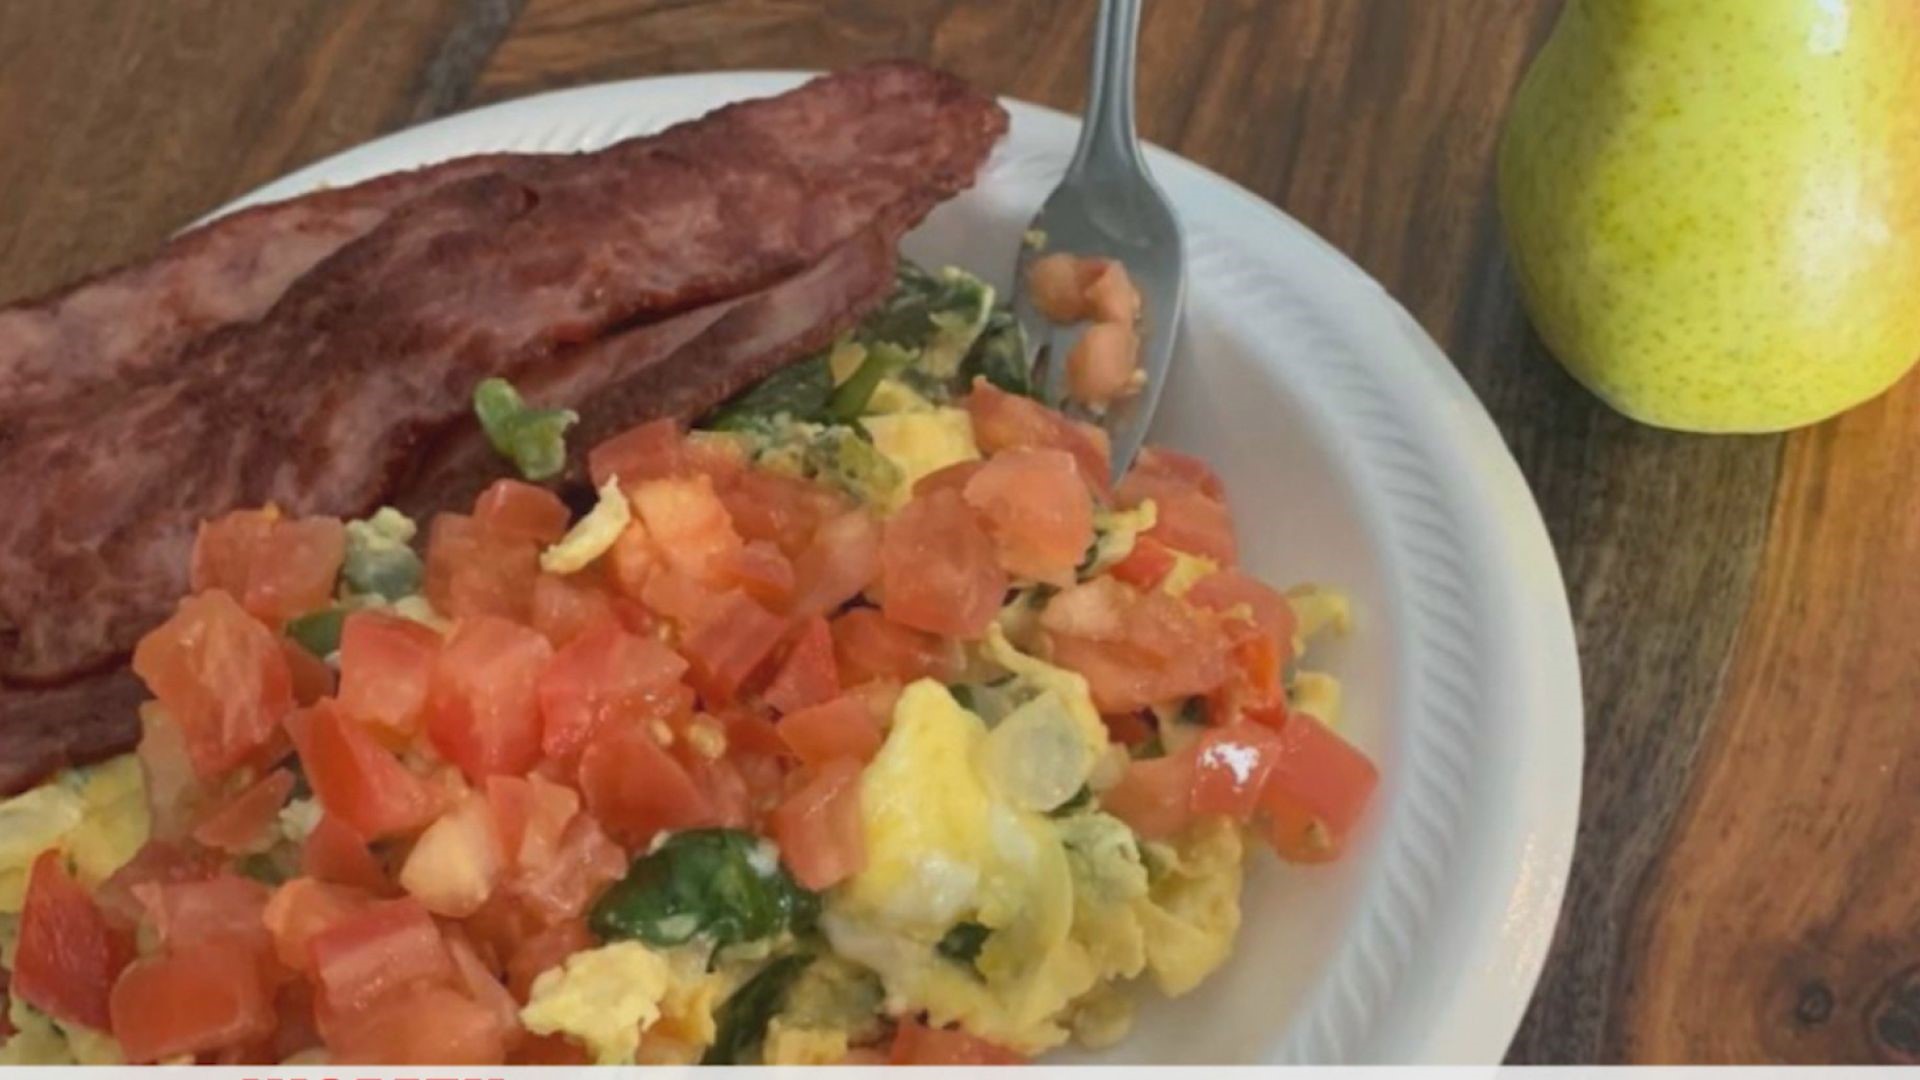 When it comes to diets, your food options can be boring and bland. Coach Lynch Hunt shares a breakfast recipe packed with protein and flavor.